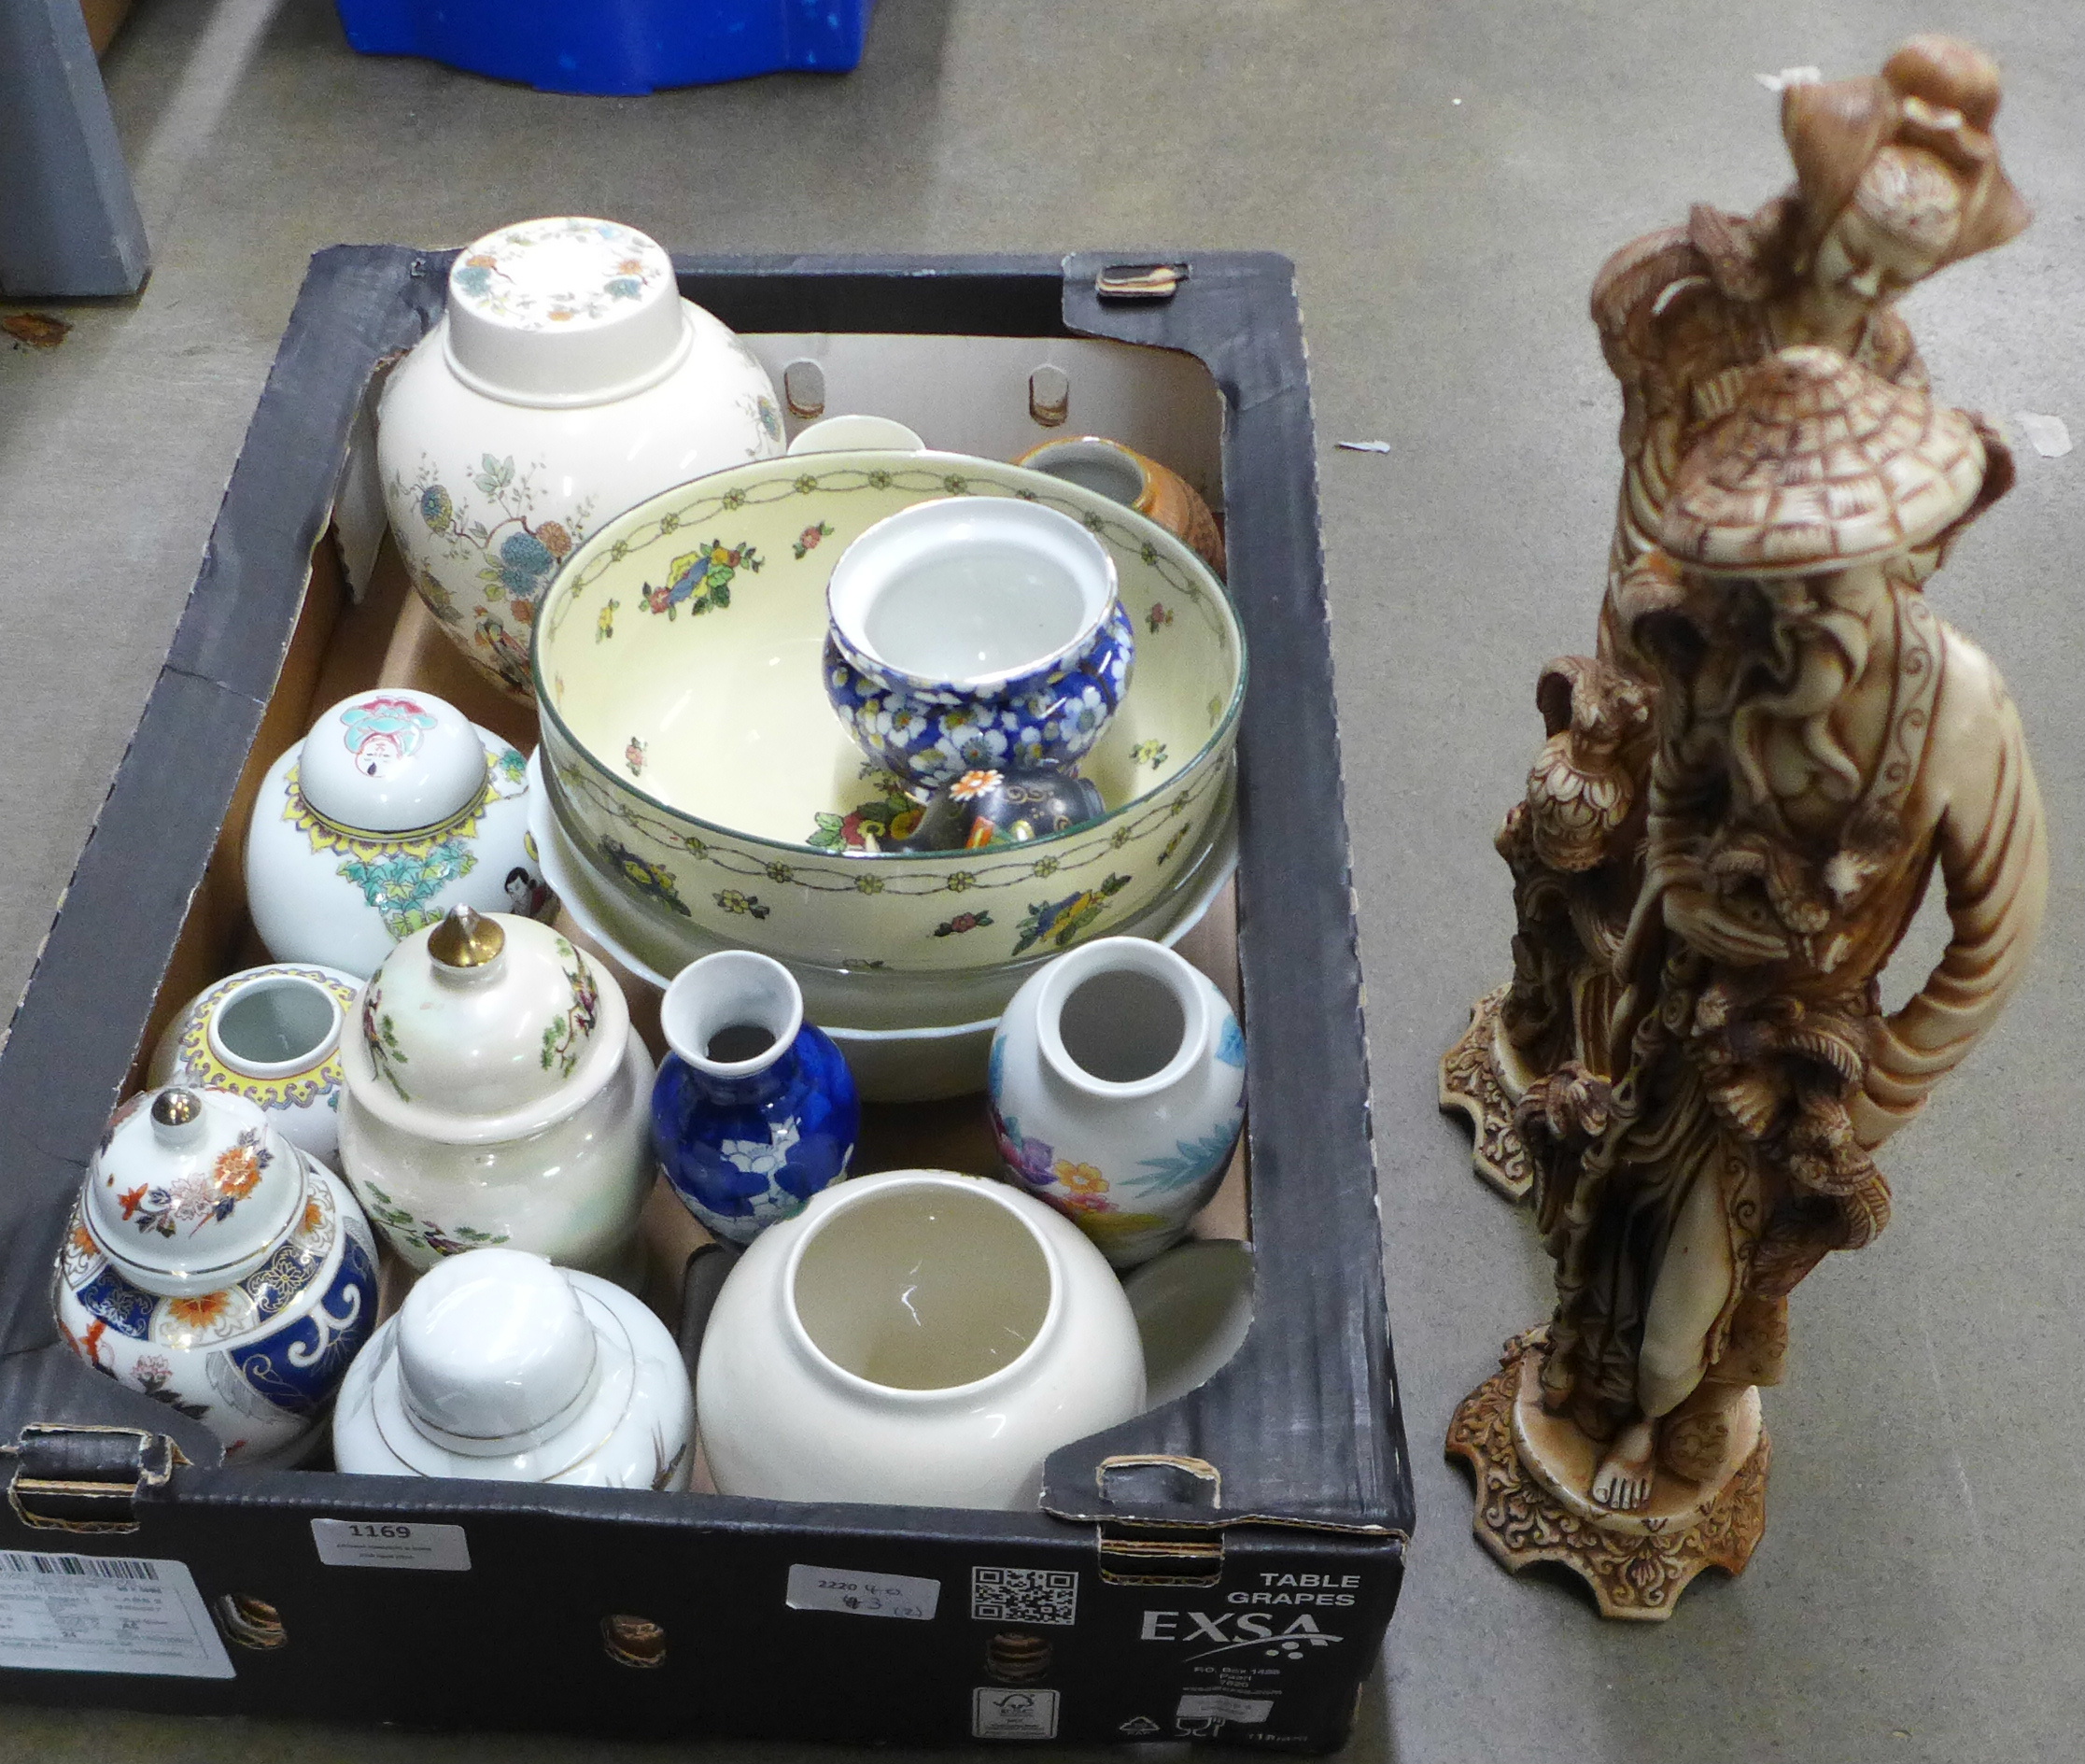 Two oriental moulded resin figures and a collection of ginger jars, bowls, Royal Doulton, etc. **